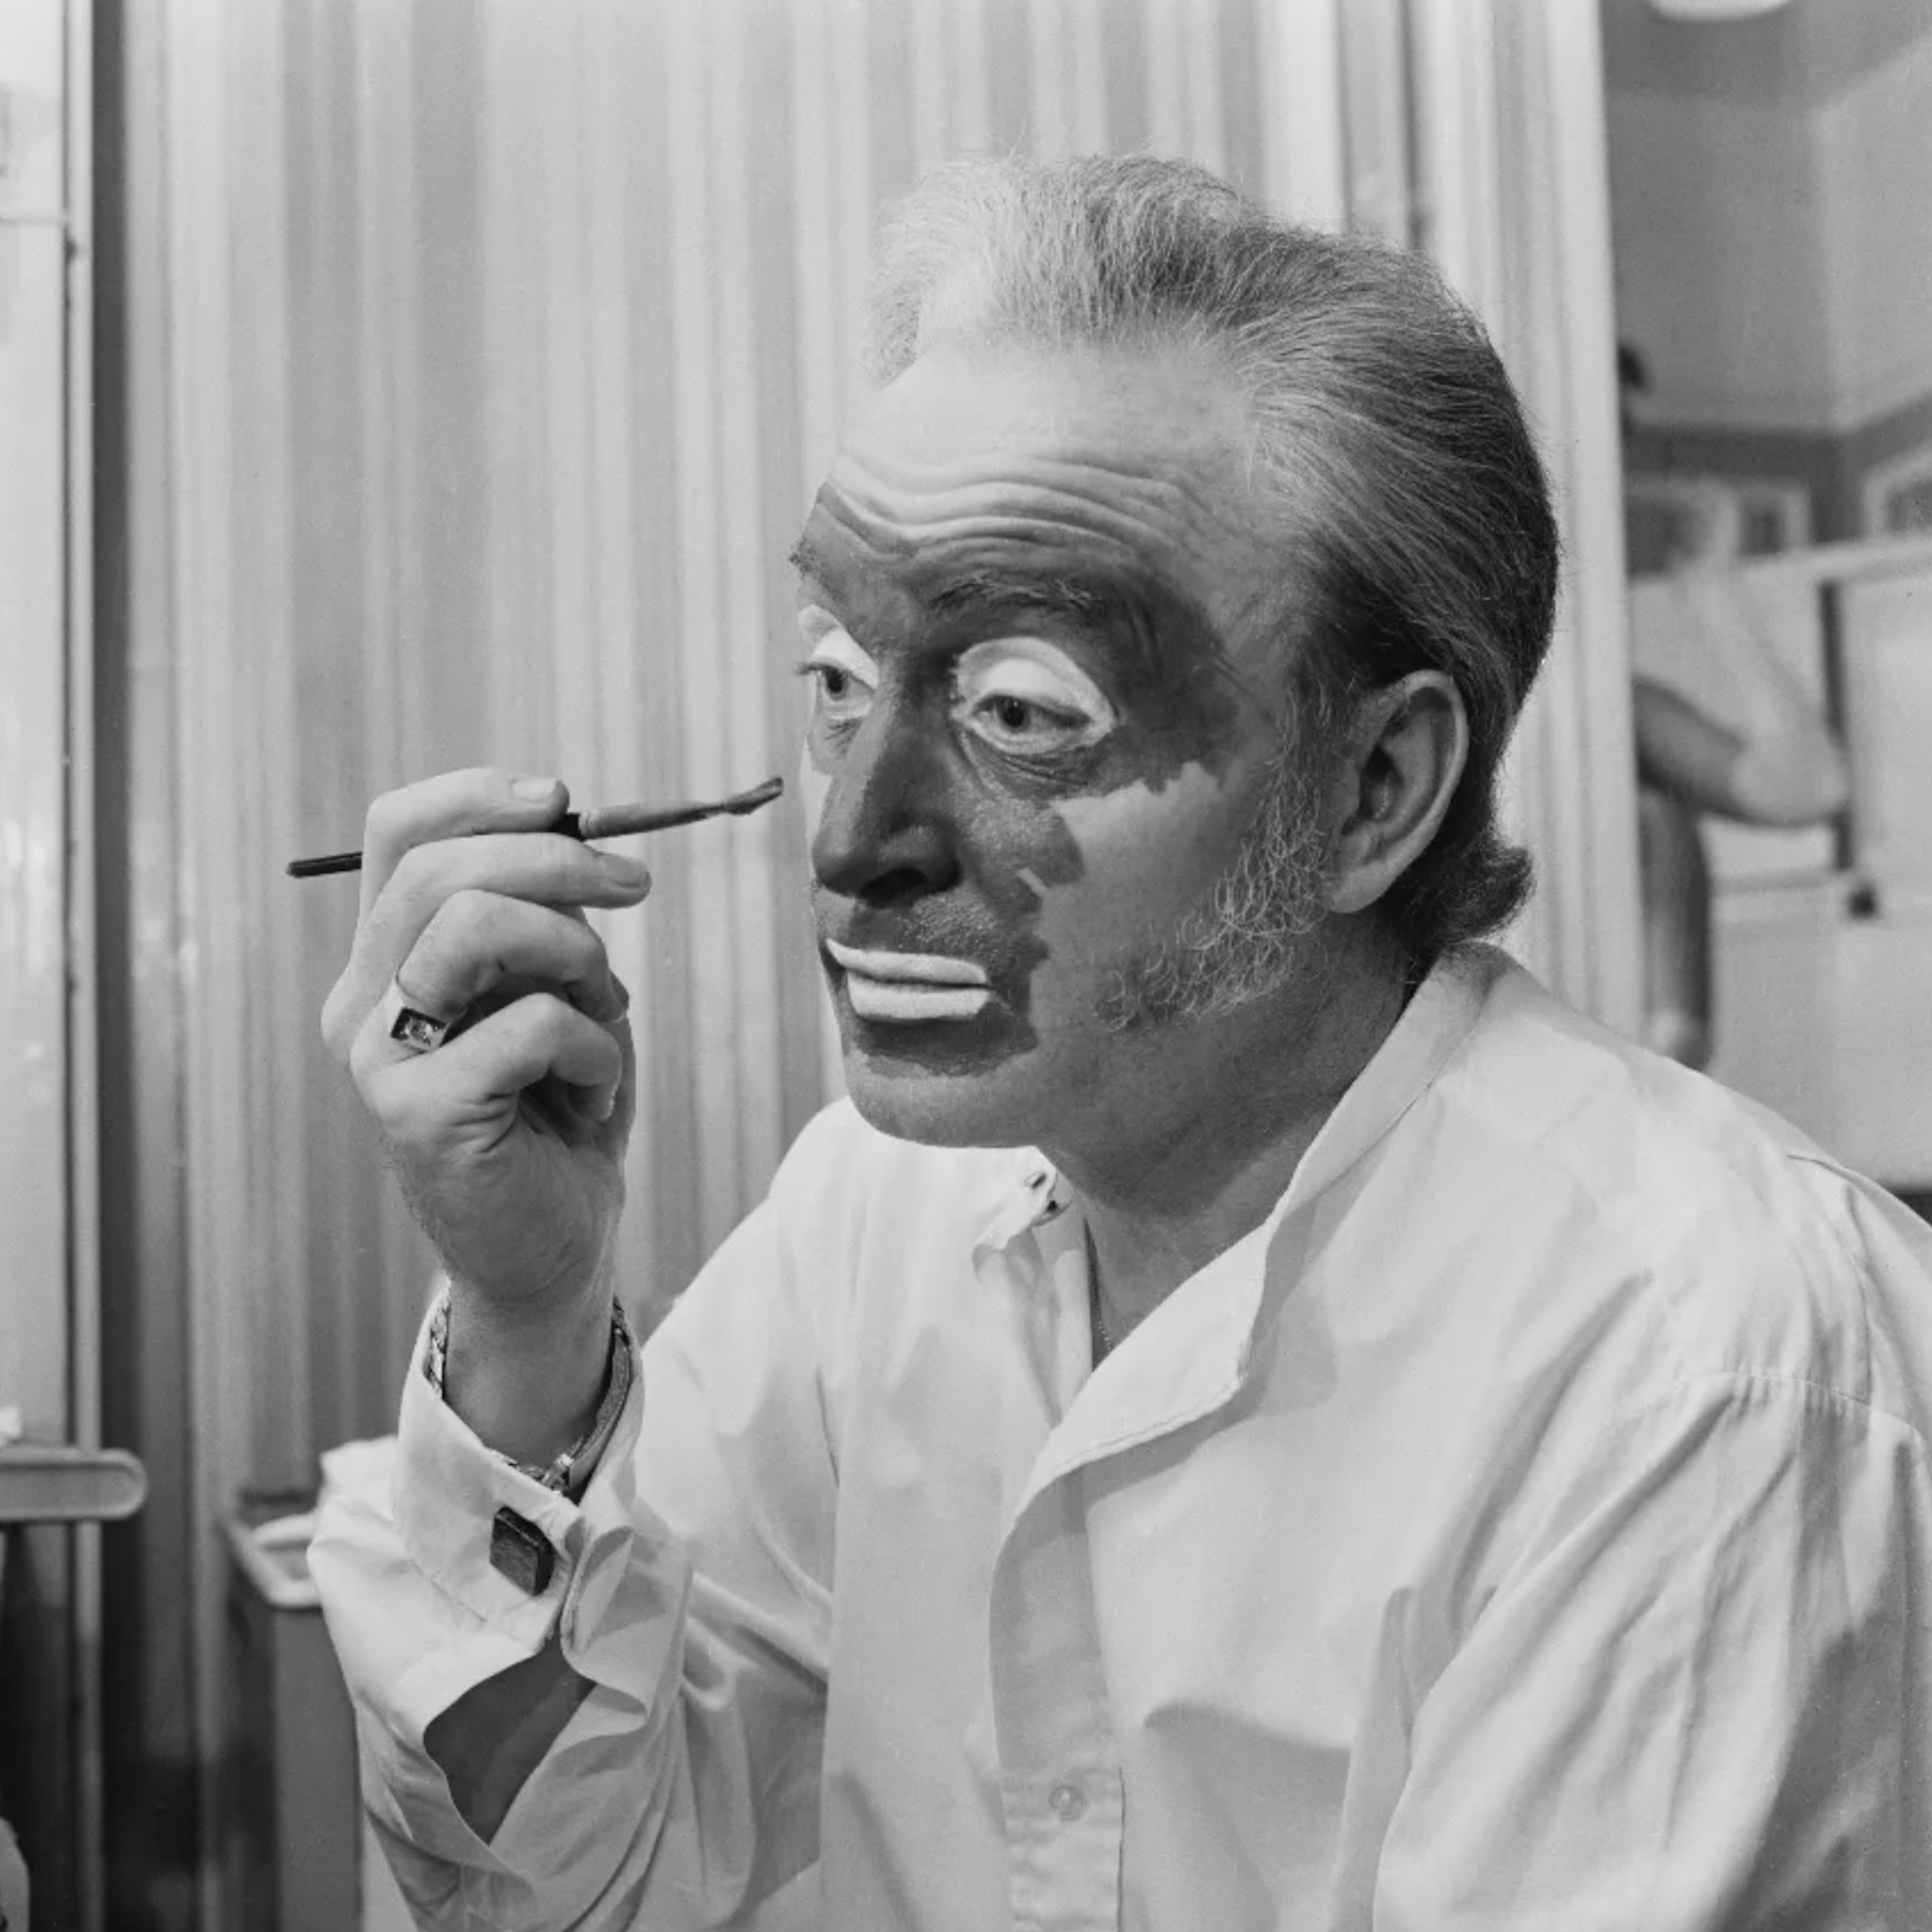 Black and white photo of white man applying dark paint to his face with a brush.